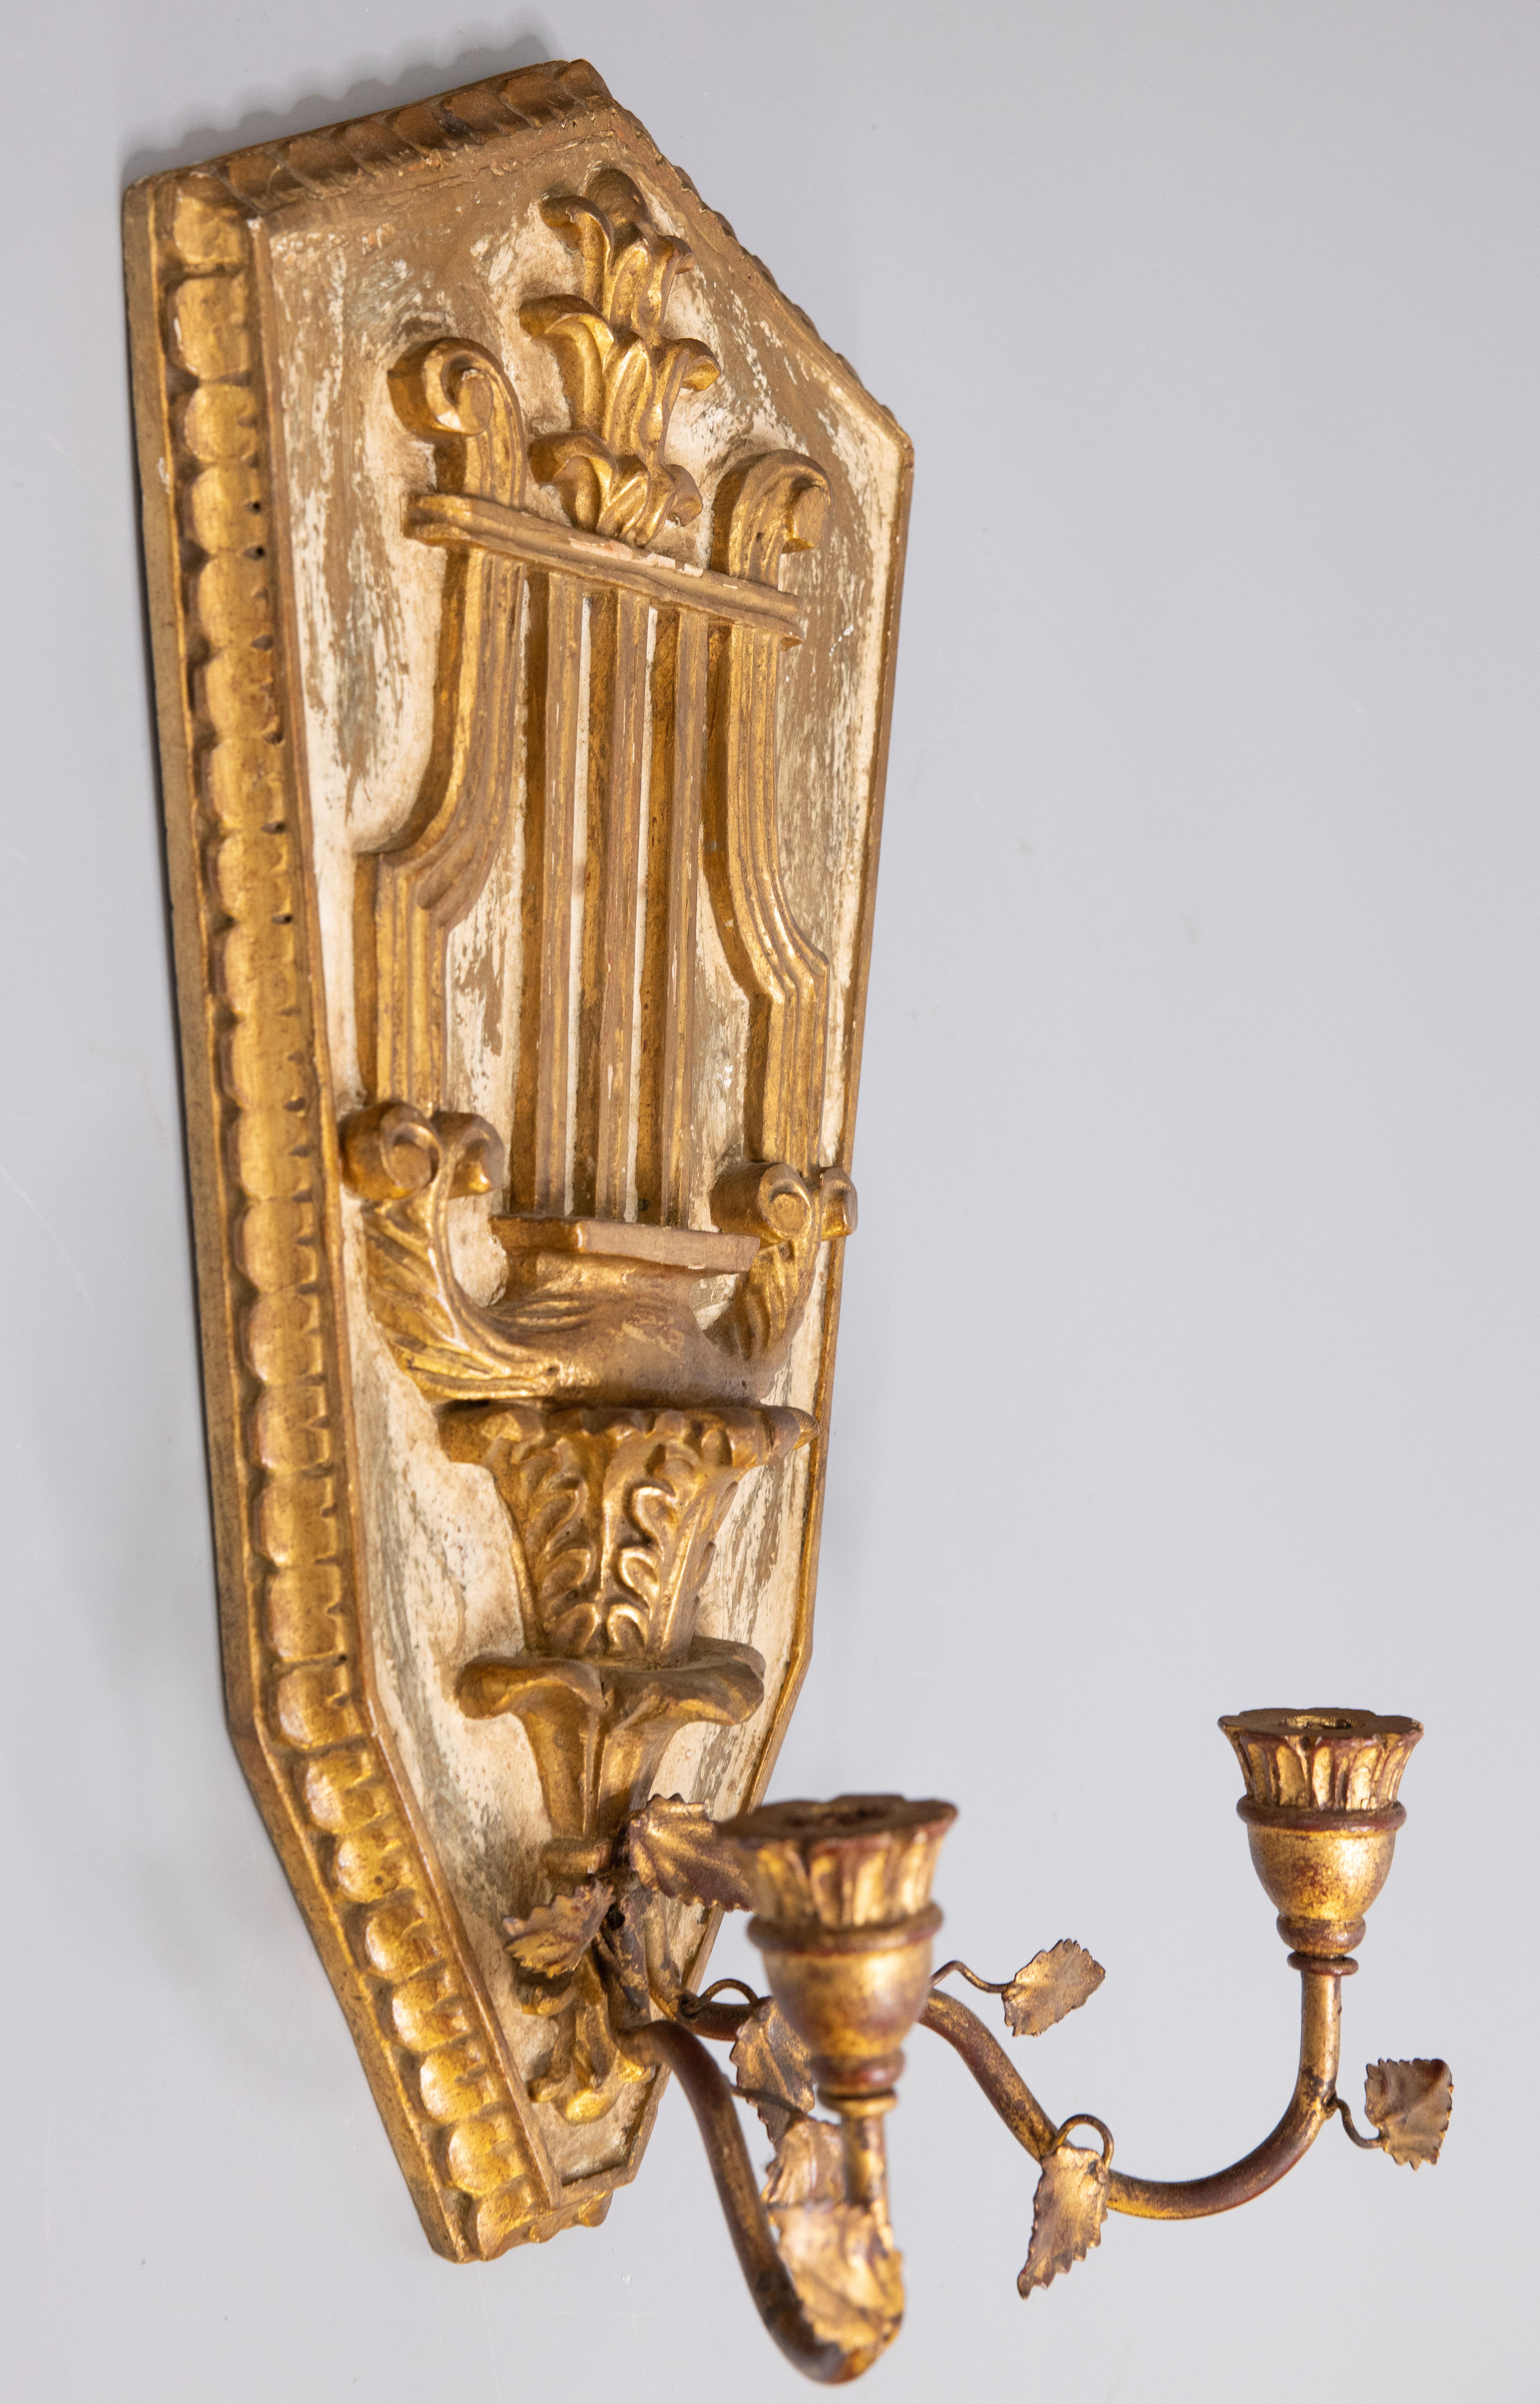 A lovely Italian Neoclassical style giltwood two arm candle wall sconce, circa 1950. This gorgeous candelabra is decorated with a carved gilded wood lyre and acanthus leaf design with tole arms and scrolling leaves. It's a nice large Size and would